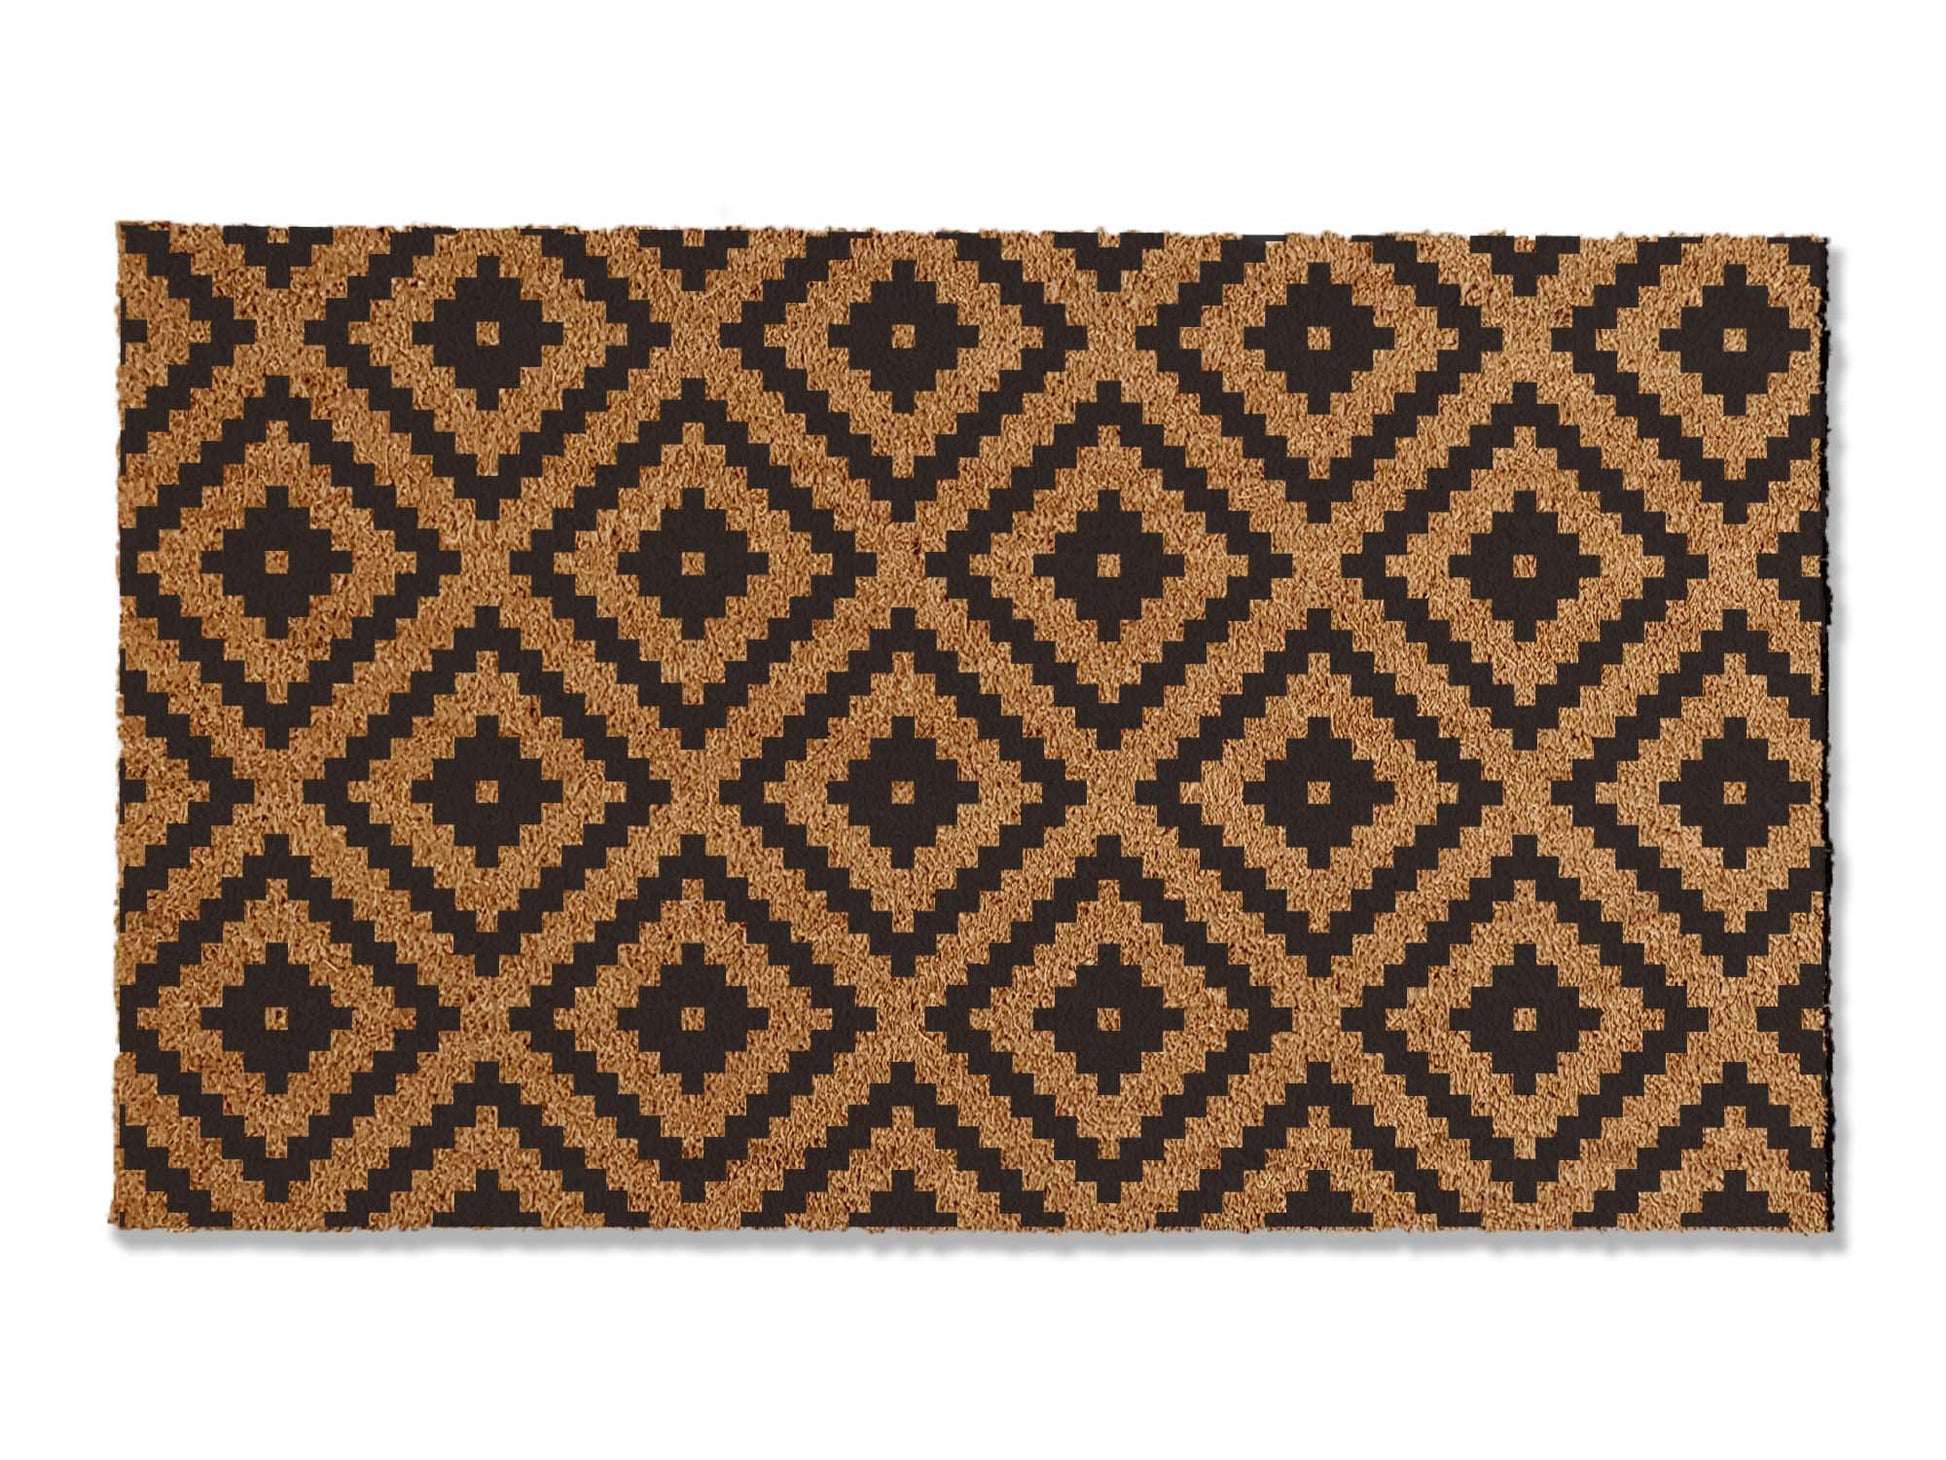 Transform your entrance with our geometric-patterned coir doormat, available in various sizes. This stylish addition not only stops dirt in its tracks but also elevates your entryway with a contemporary design. Choose the perfect size to enhance both functionality and aesthetics at your doorstep.